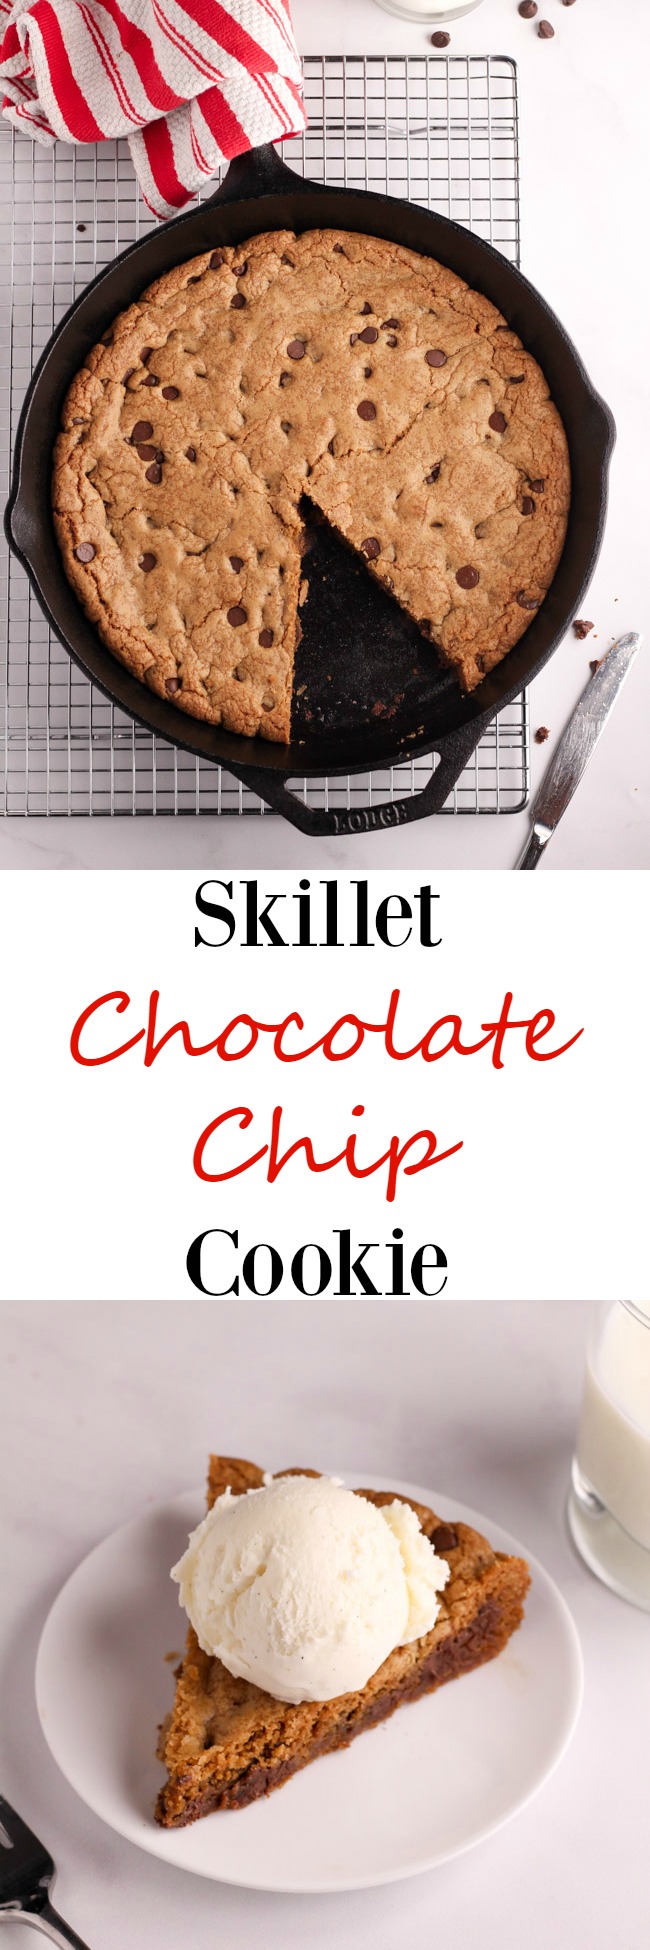 A recipe for a skillet chocolate chip cookie makes one delicious 12" cookie that you might not want to share! www.cookingismessy.com